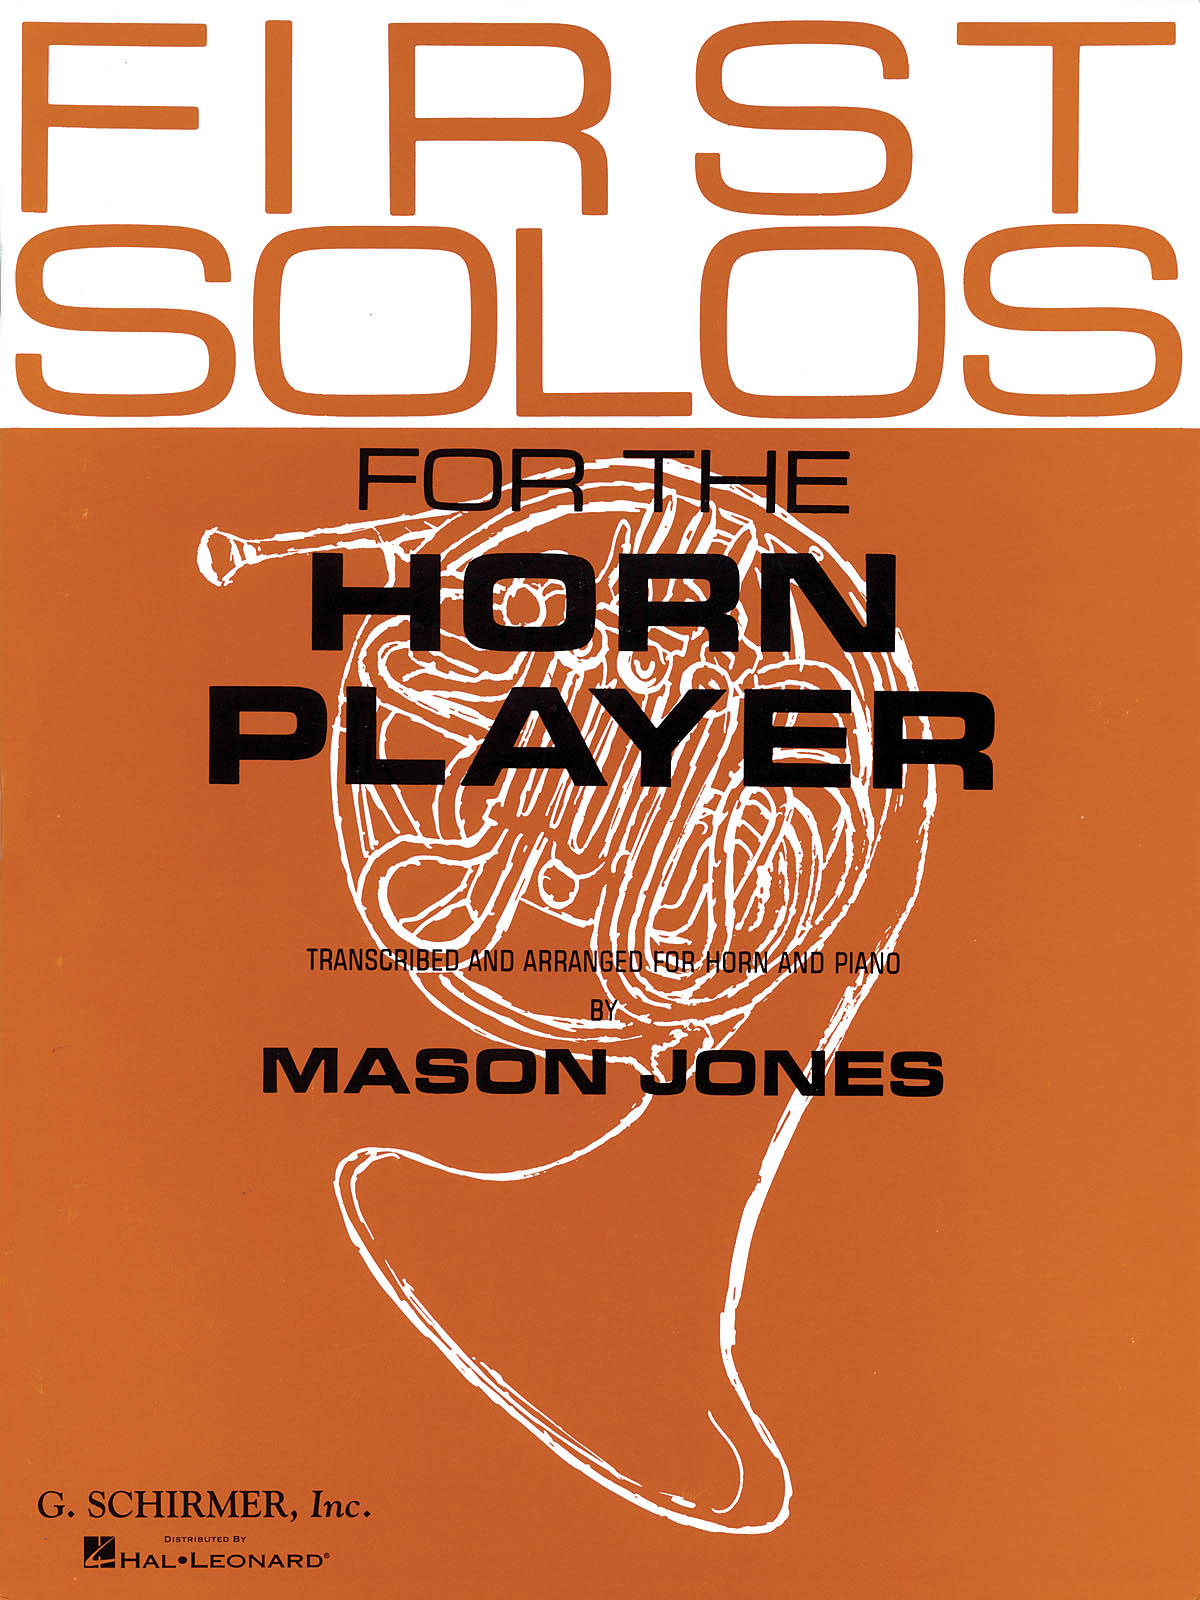 First Solos For The Horn Player